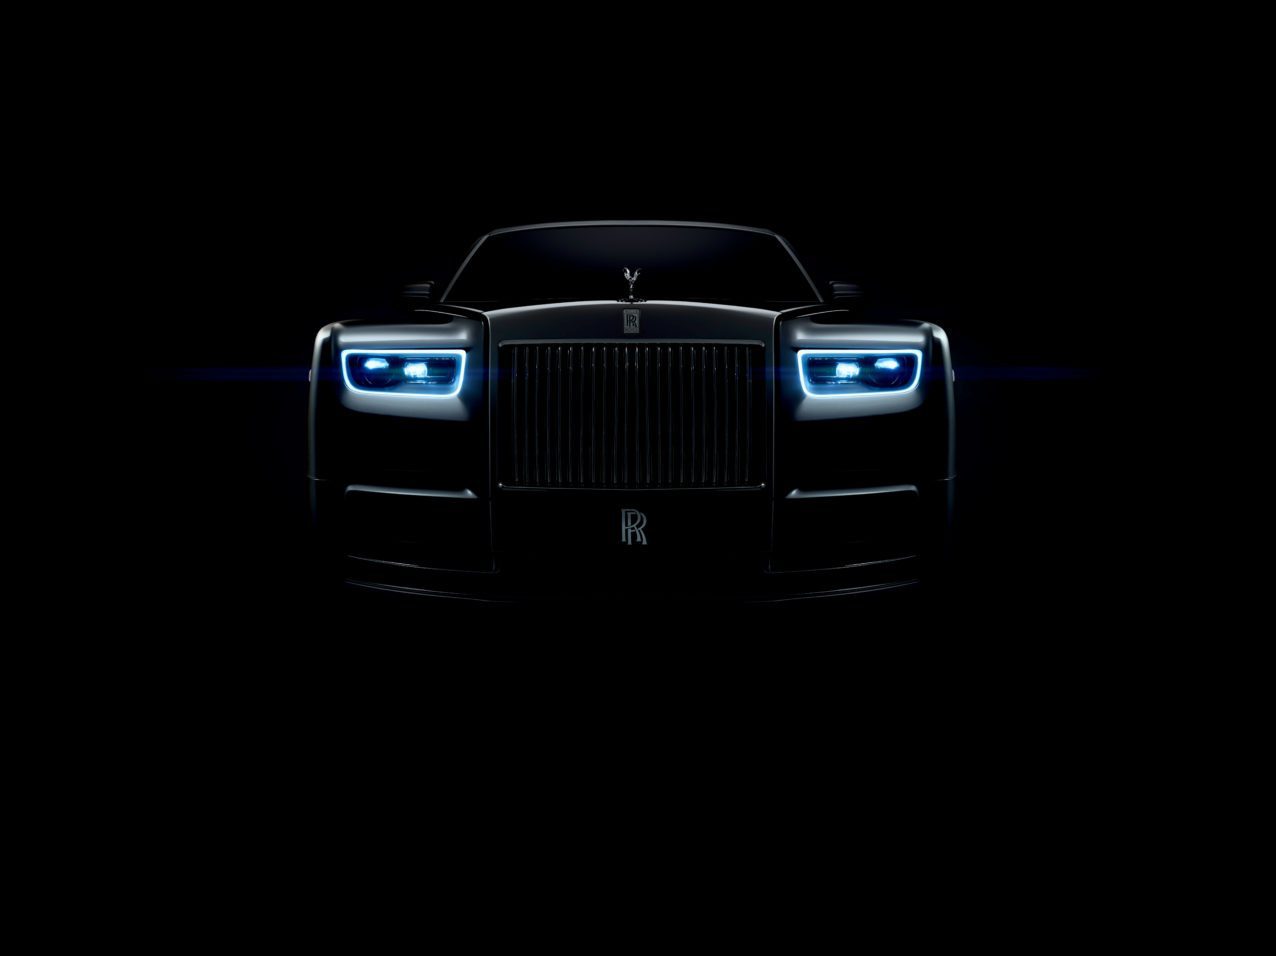 Rolls-Royce Prices, Reviews & Ratings